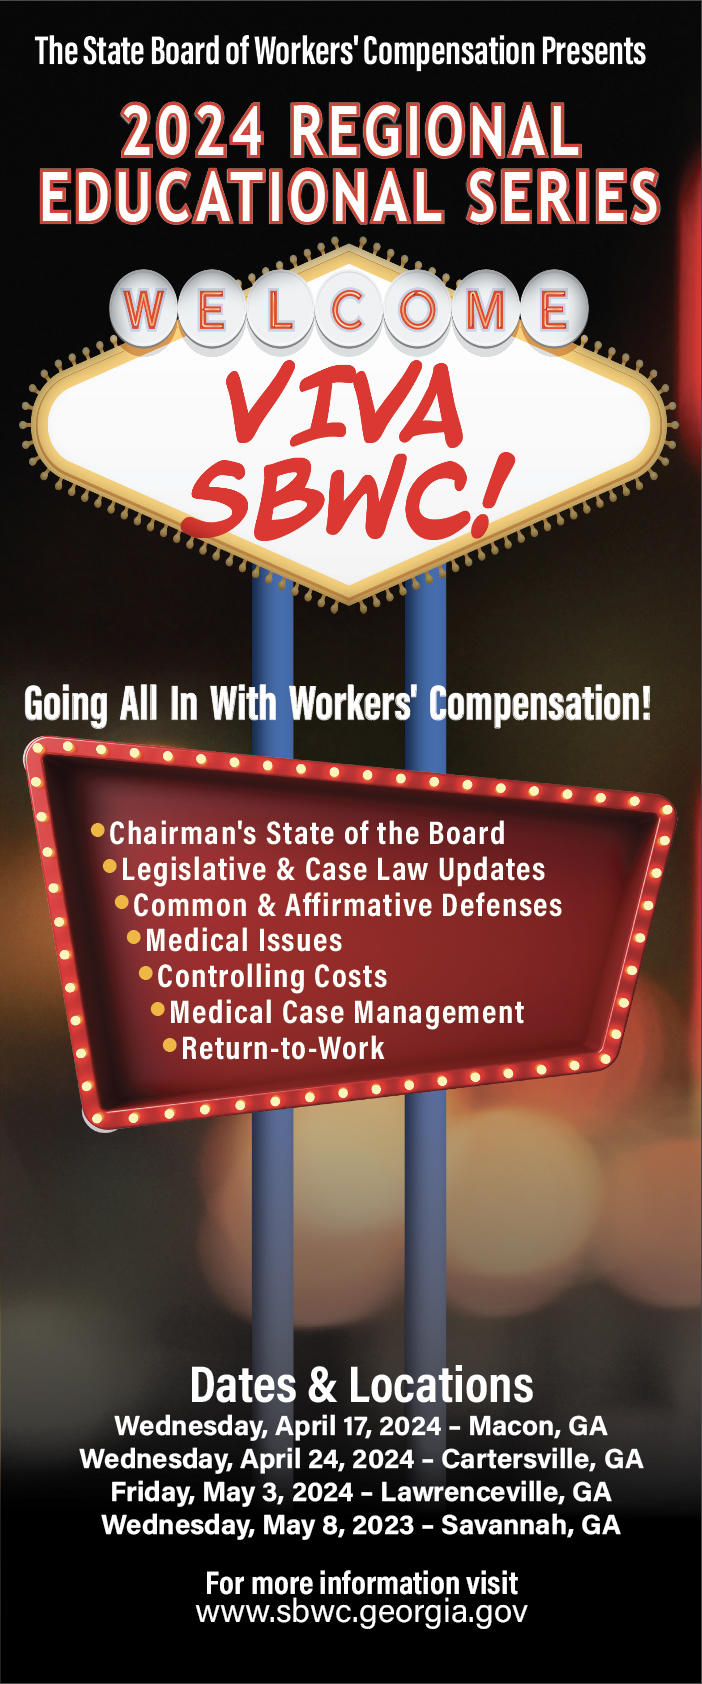 Welcome Viva SBWC! - Going All in with Workers' Compensation!